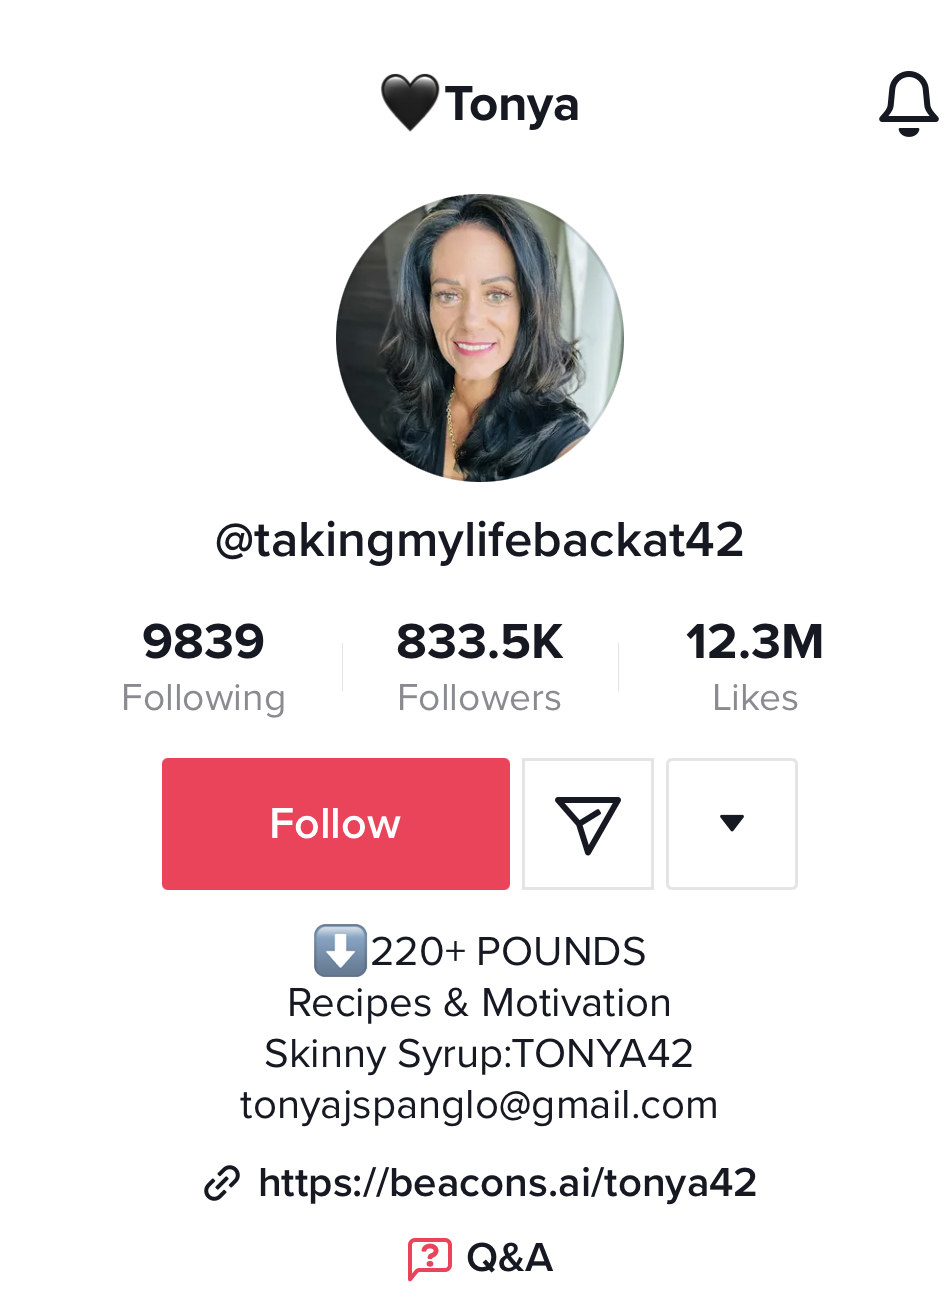 Tonya&#x27;s TikTok profile: down 220+ pounds, recipes and motivation, and a code for Skinny Syrup